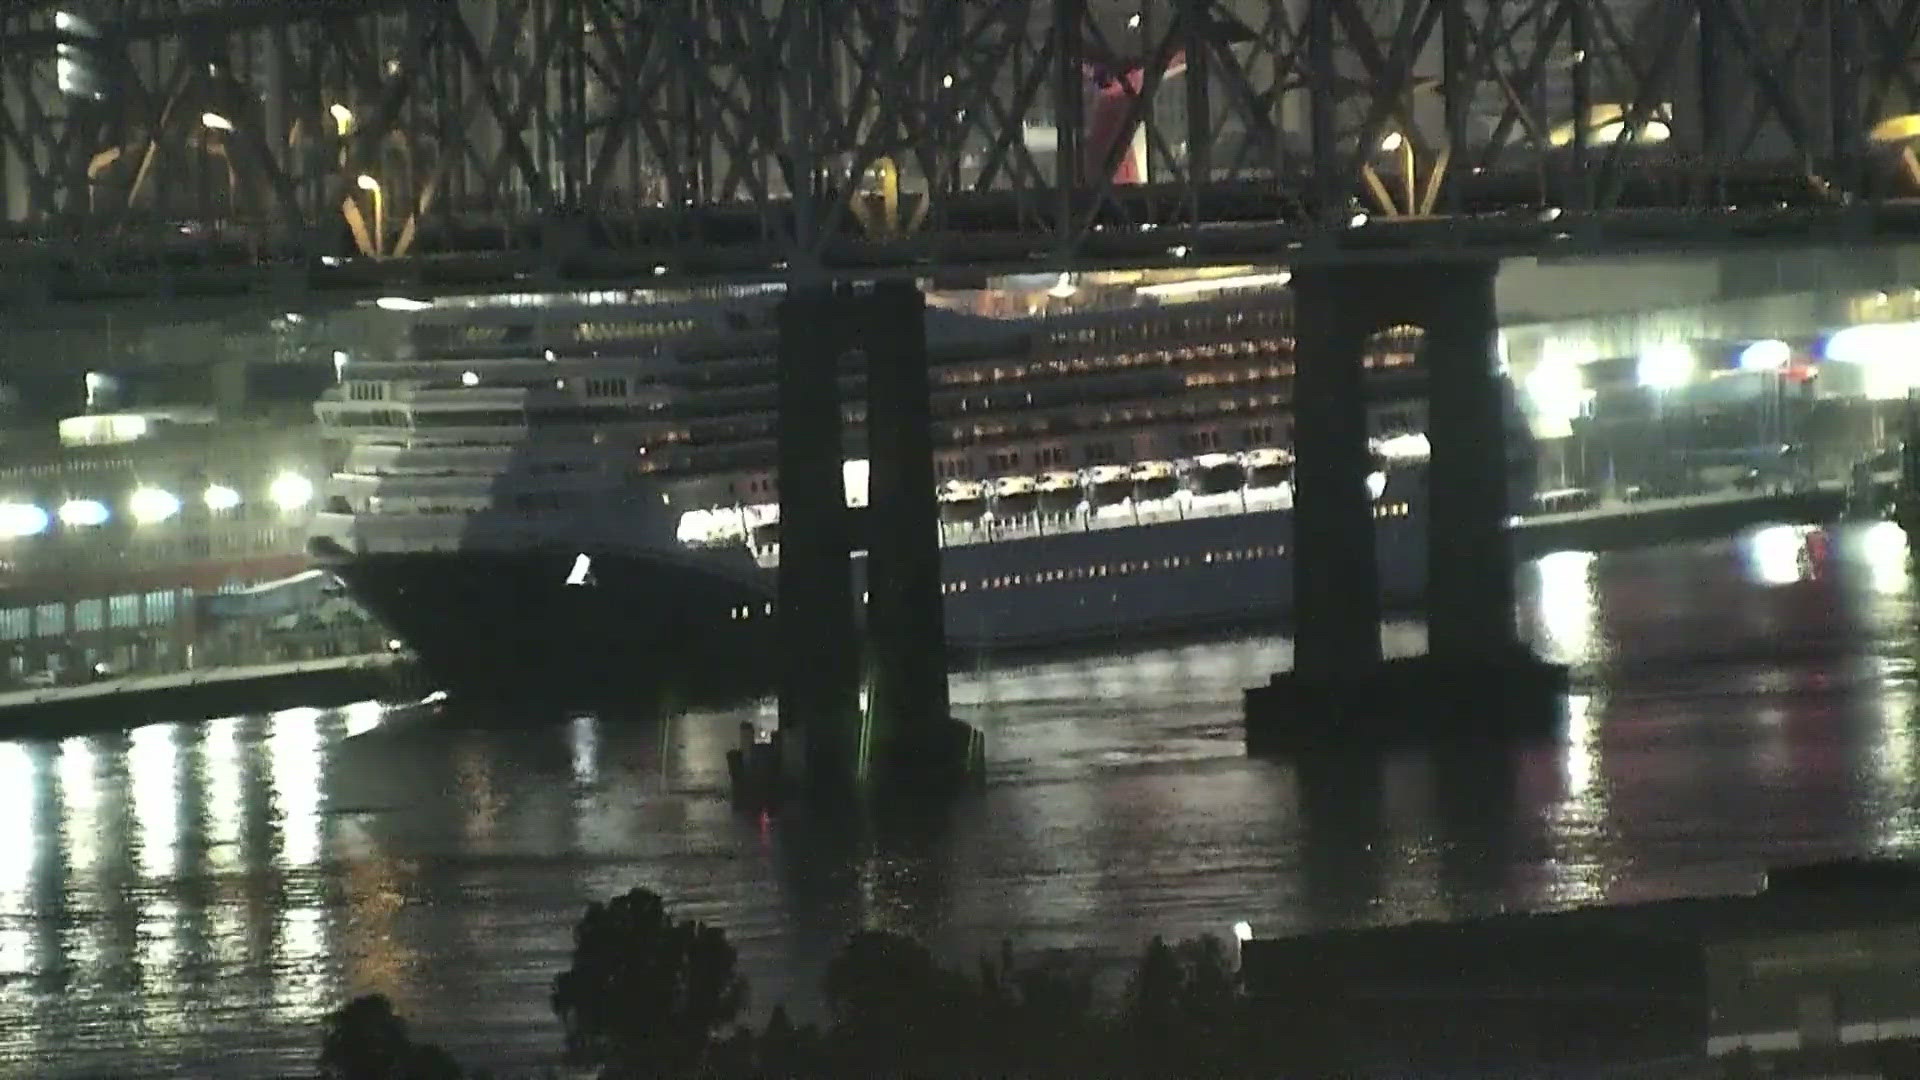 Carnival Liberty arrives in the Port of New Orleans.